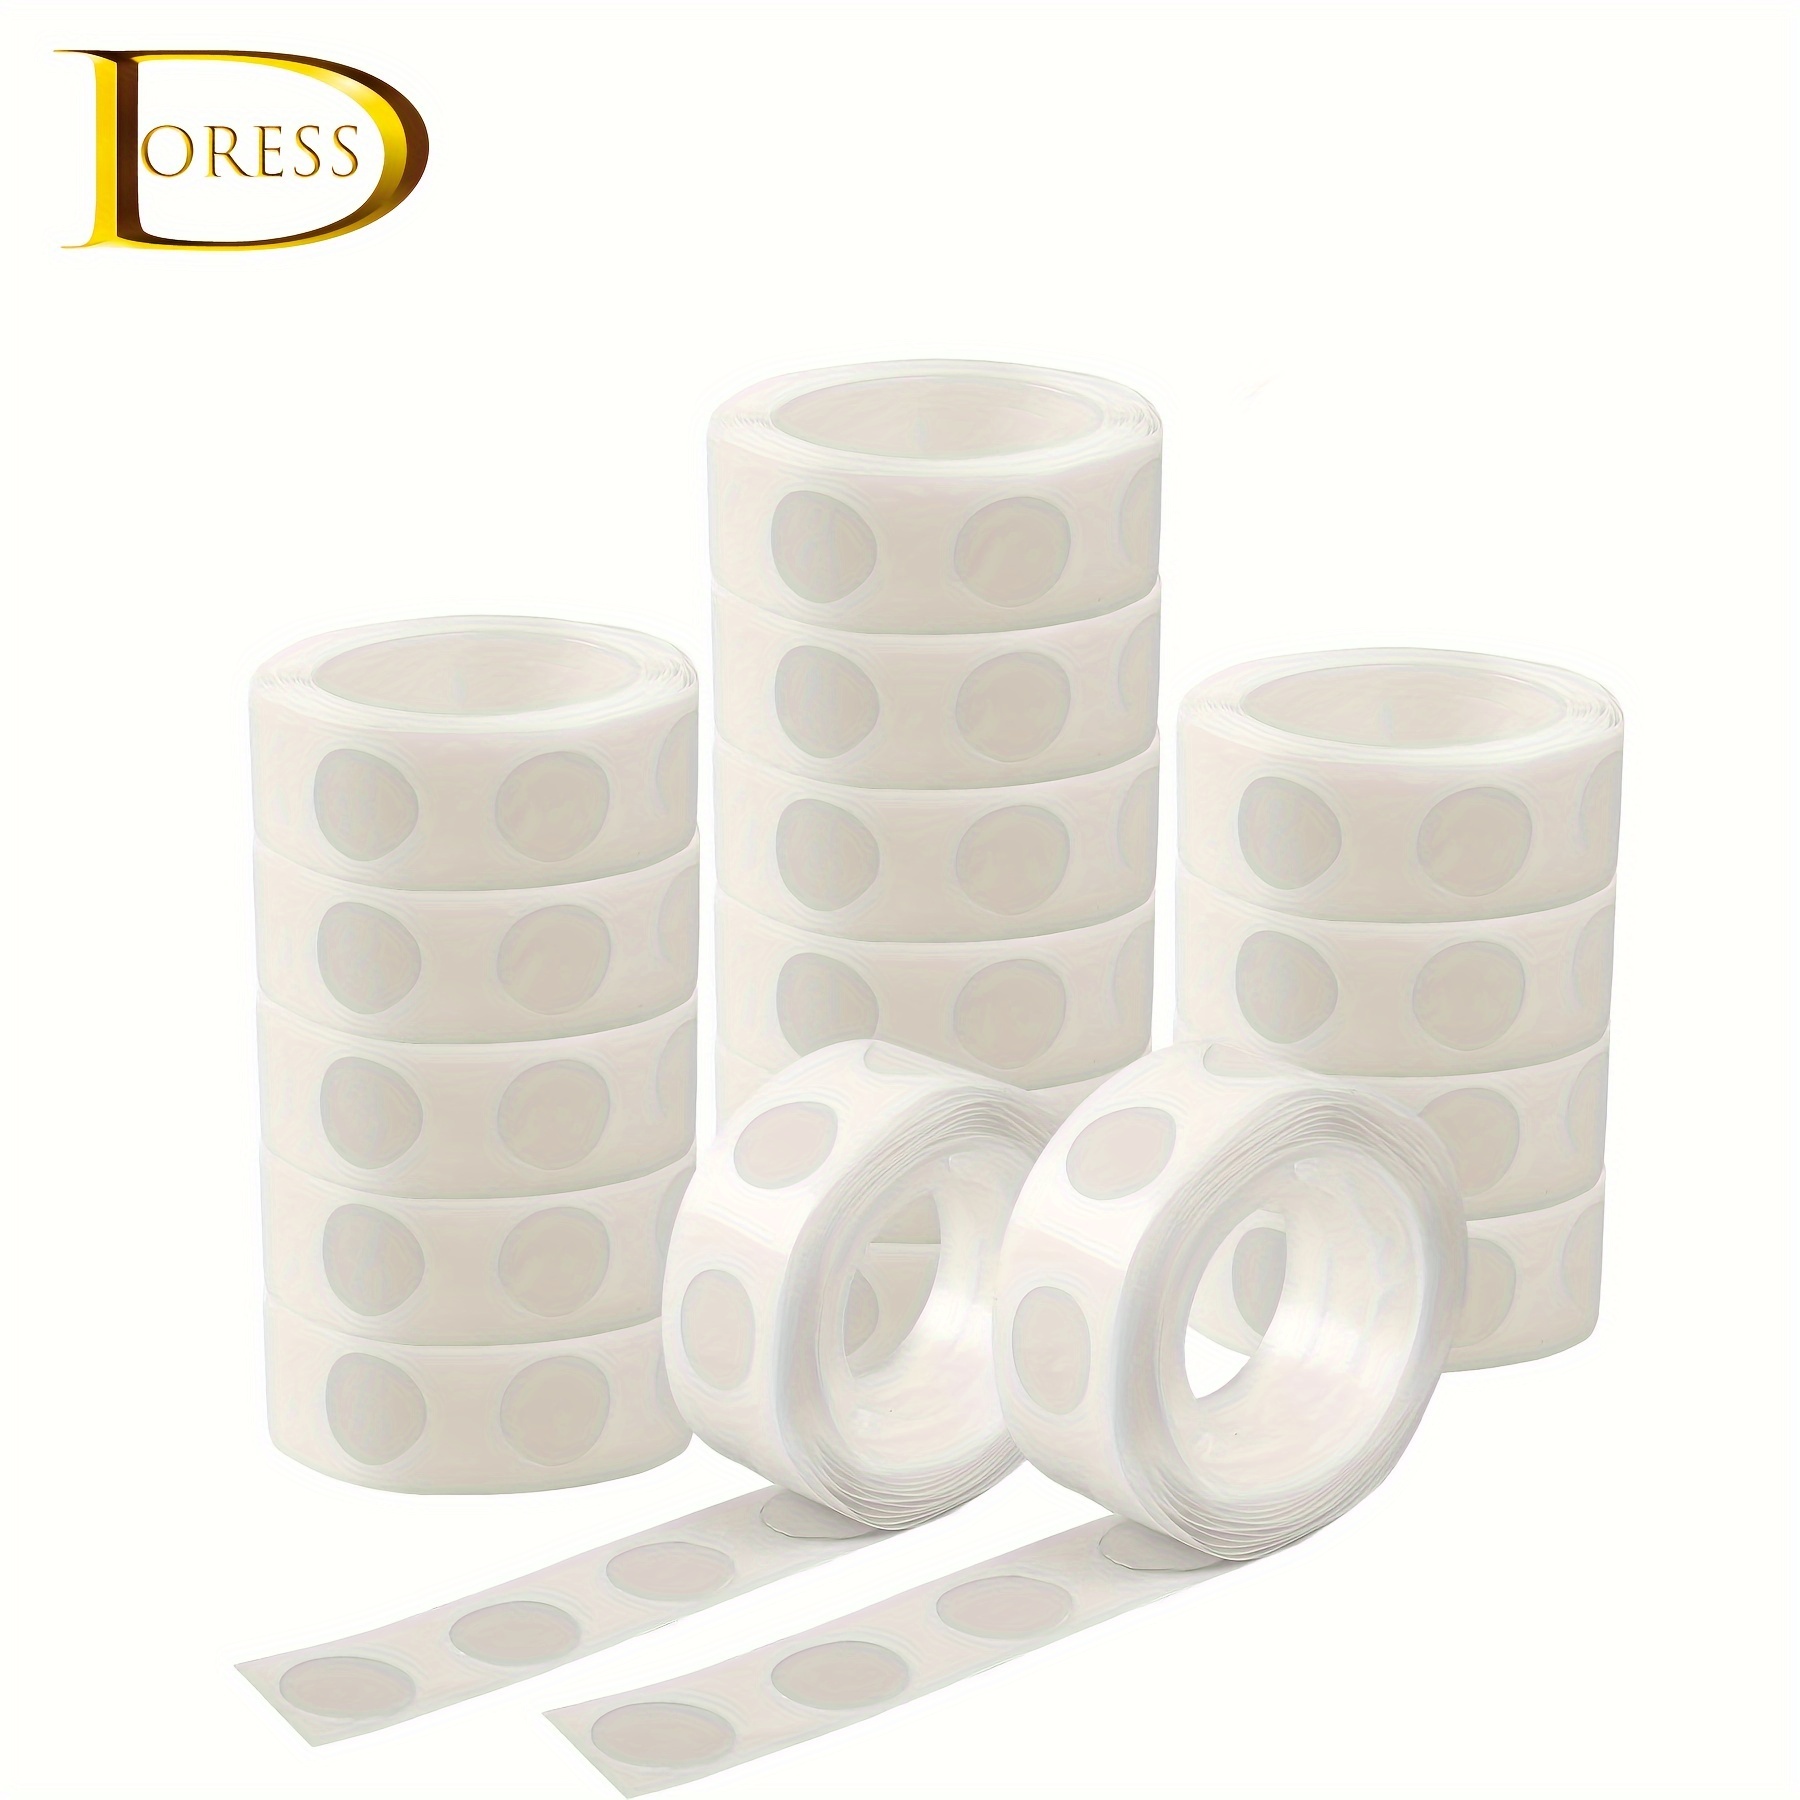 3pcs Glue Dots, Double Sided Adhesive Dots, Multi-functional